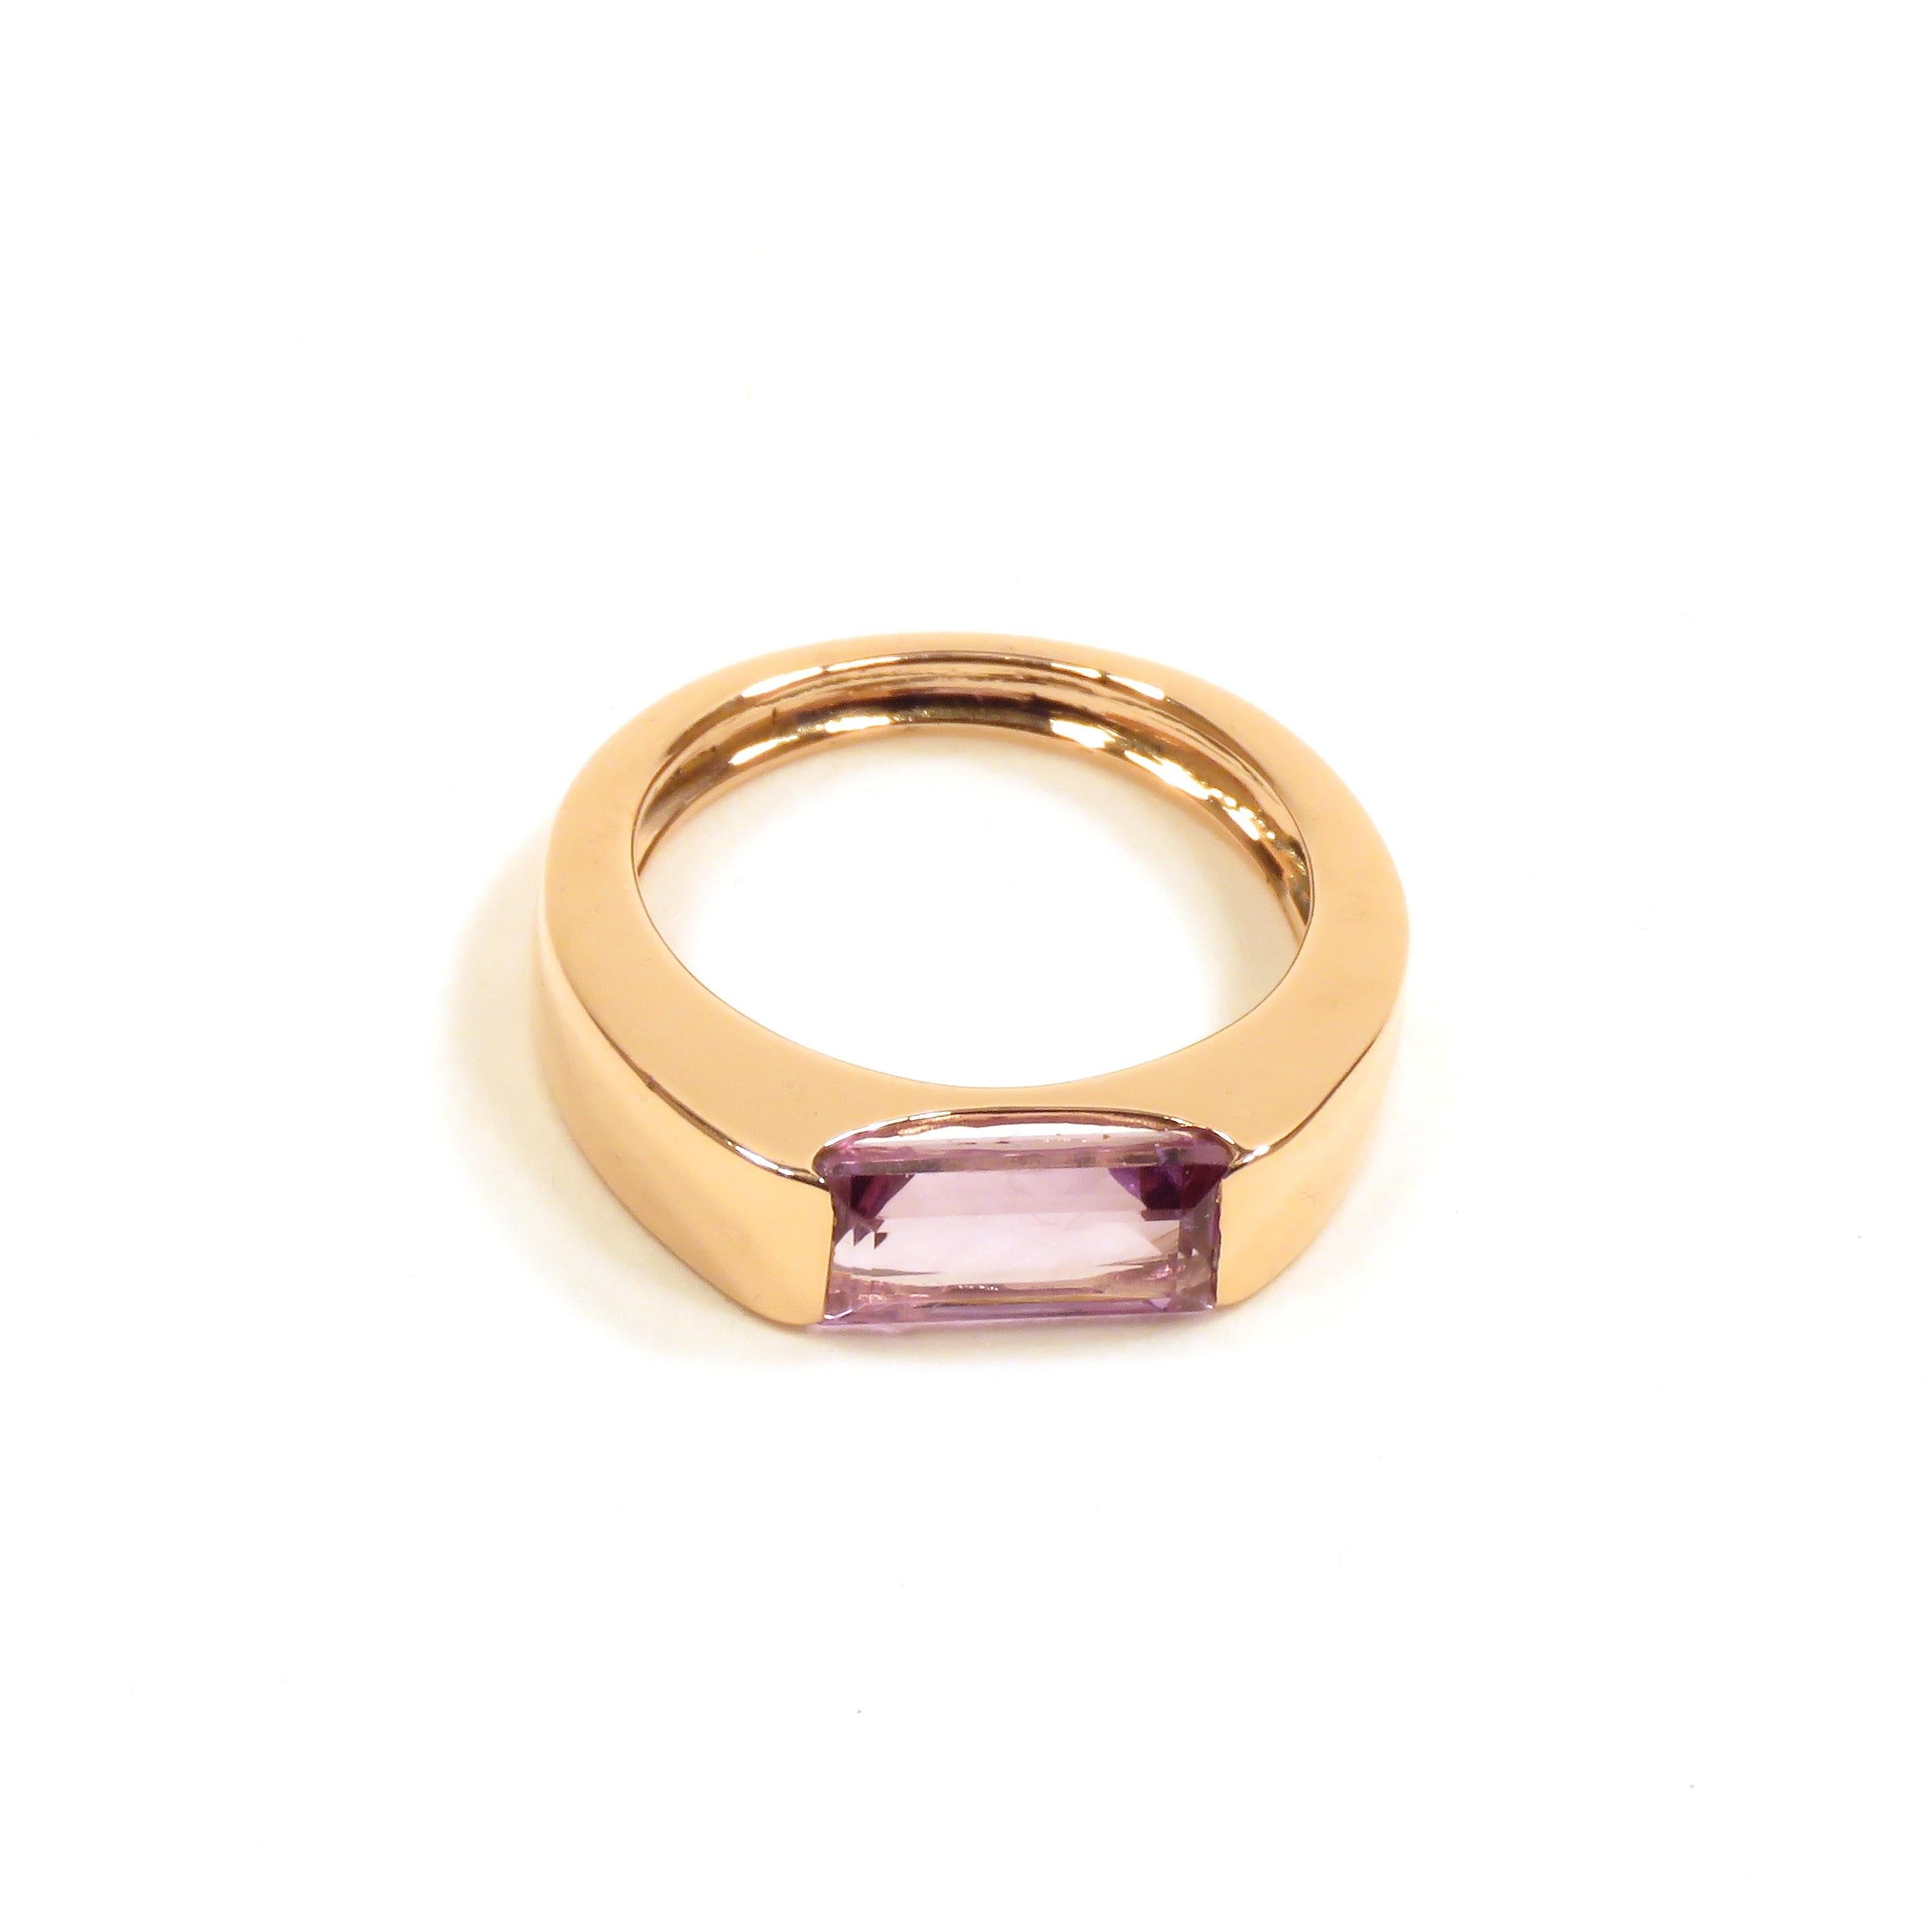 Amethyst Rose Gold Band Ring Handcrafted in Italy by Botta Gioielli In New Condition For Sale In Milano, IT